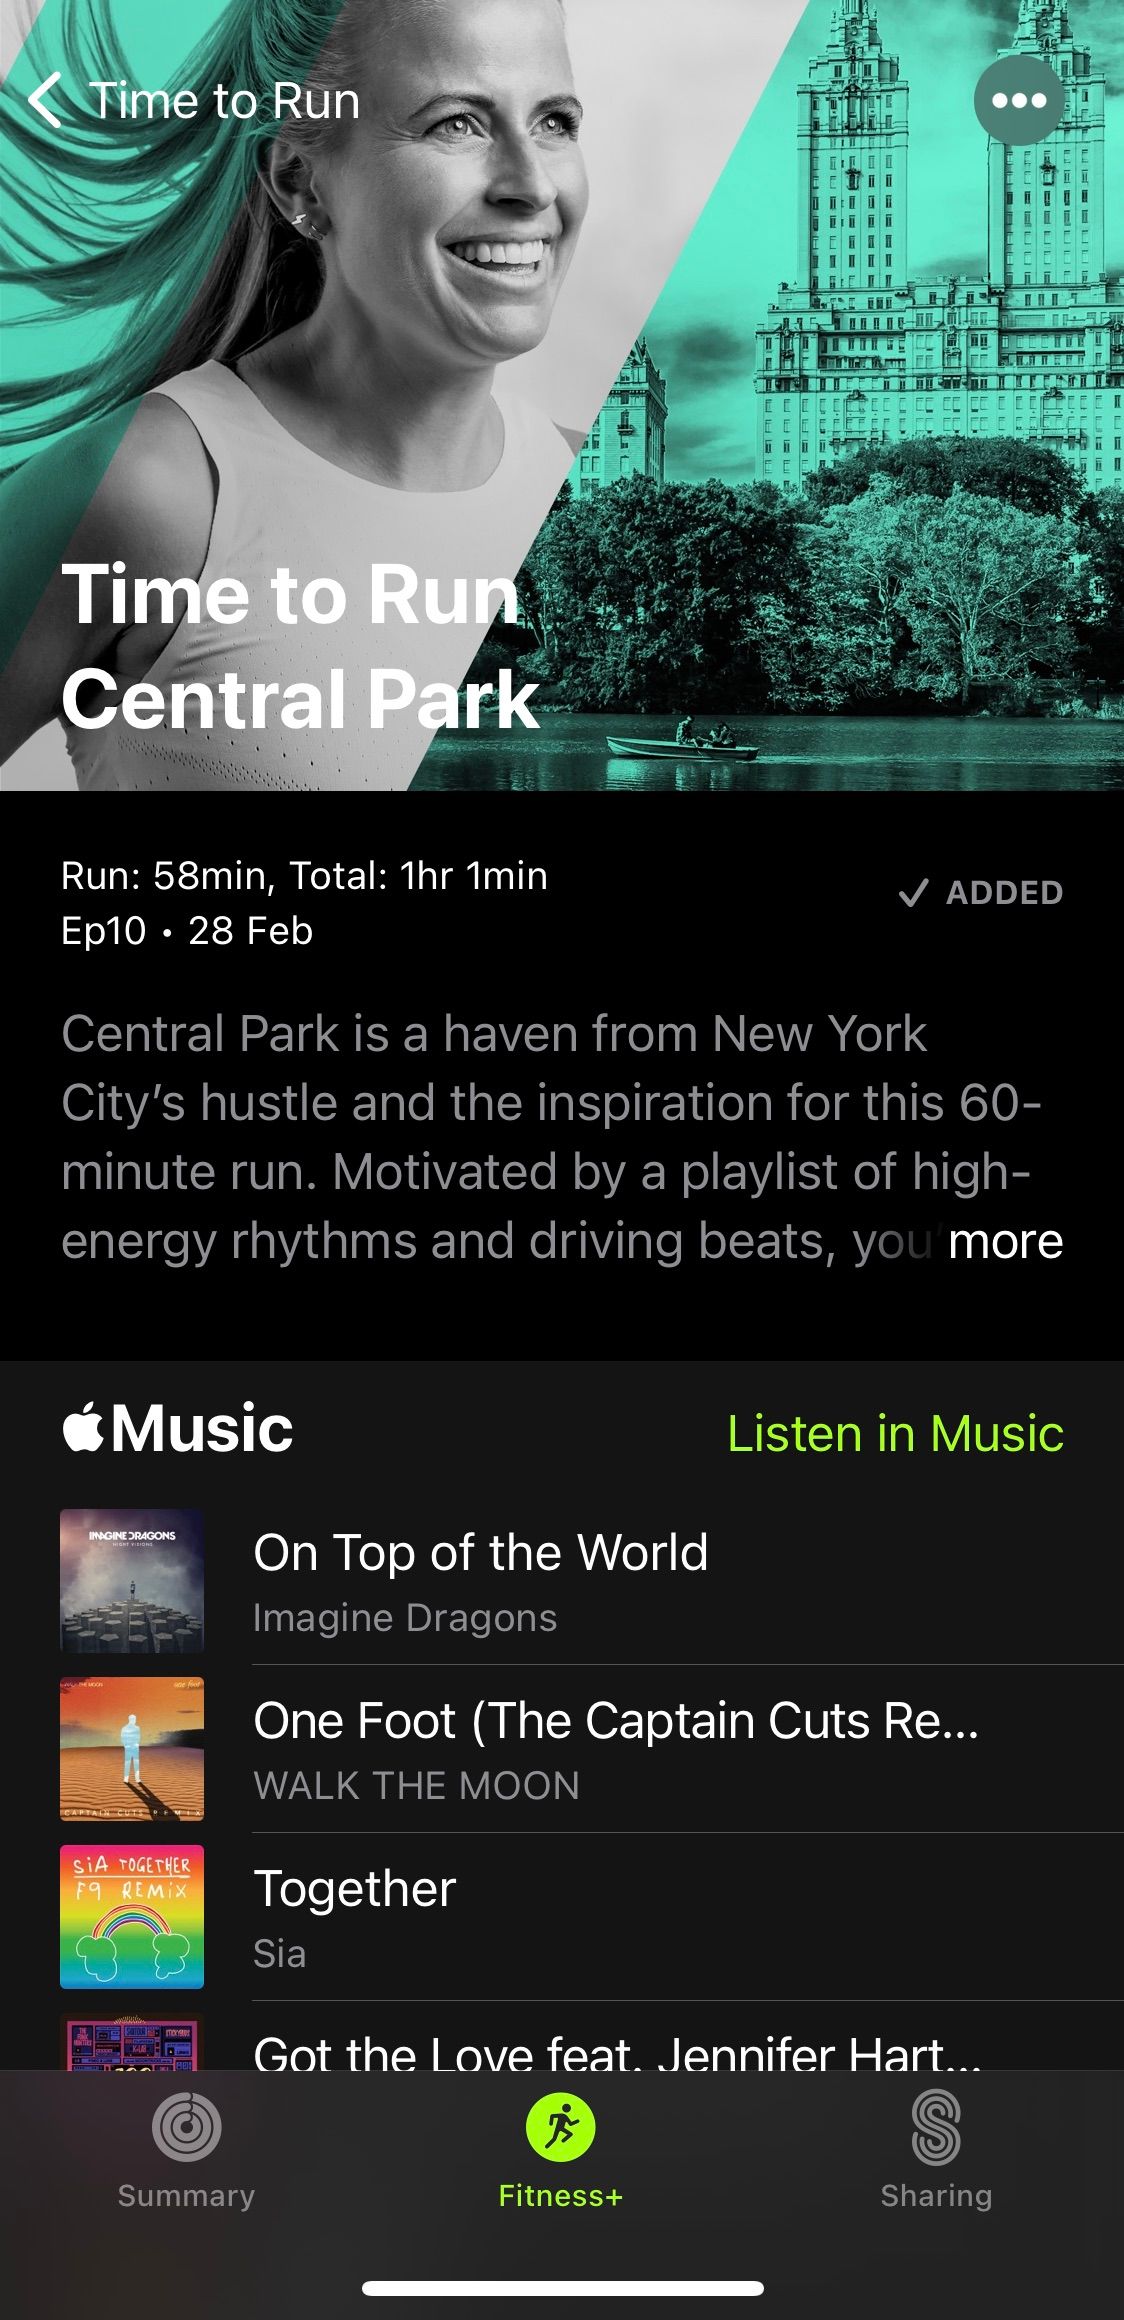 Screenshot from Apple Fitness+ app showing the cover screen for the Time to Run Central Park workout